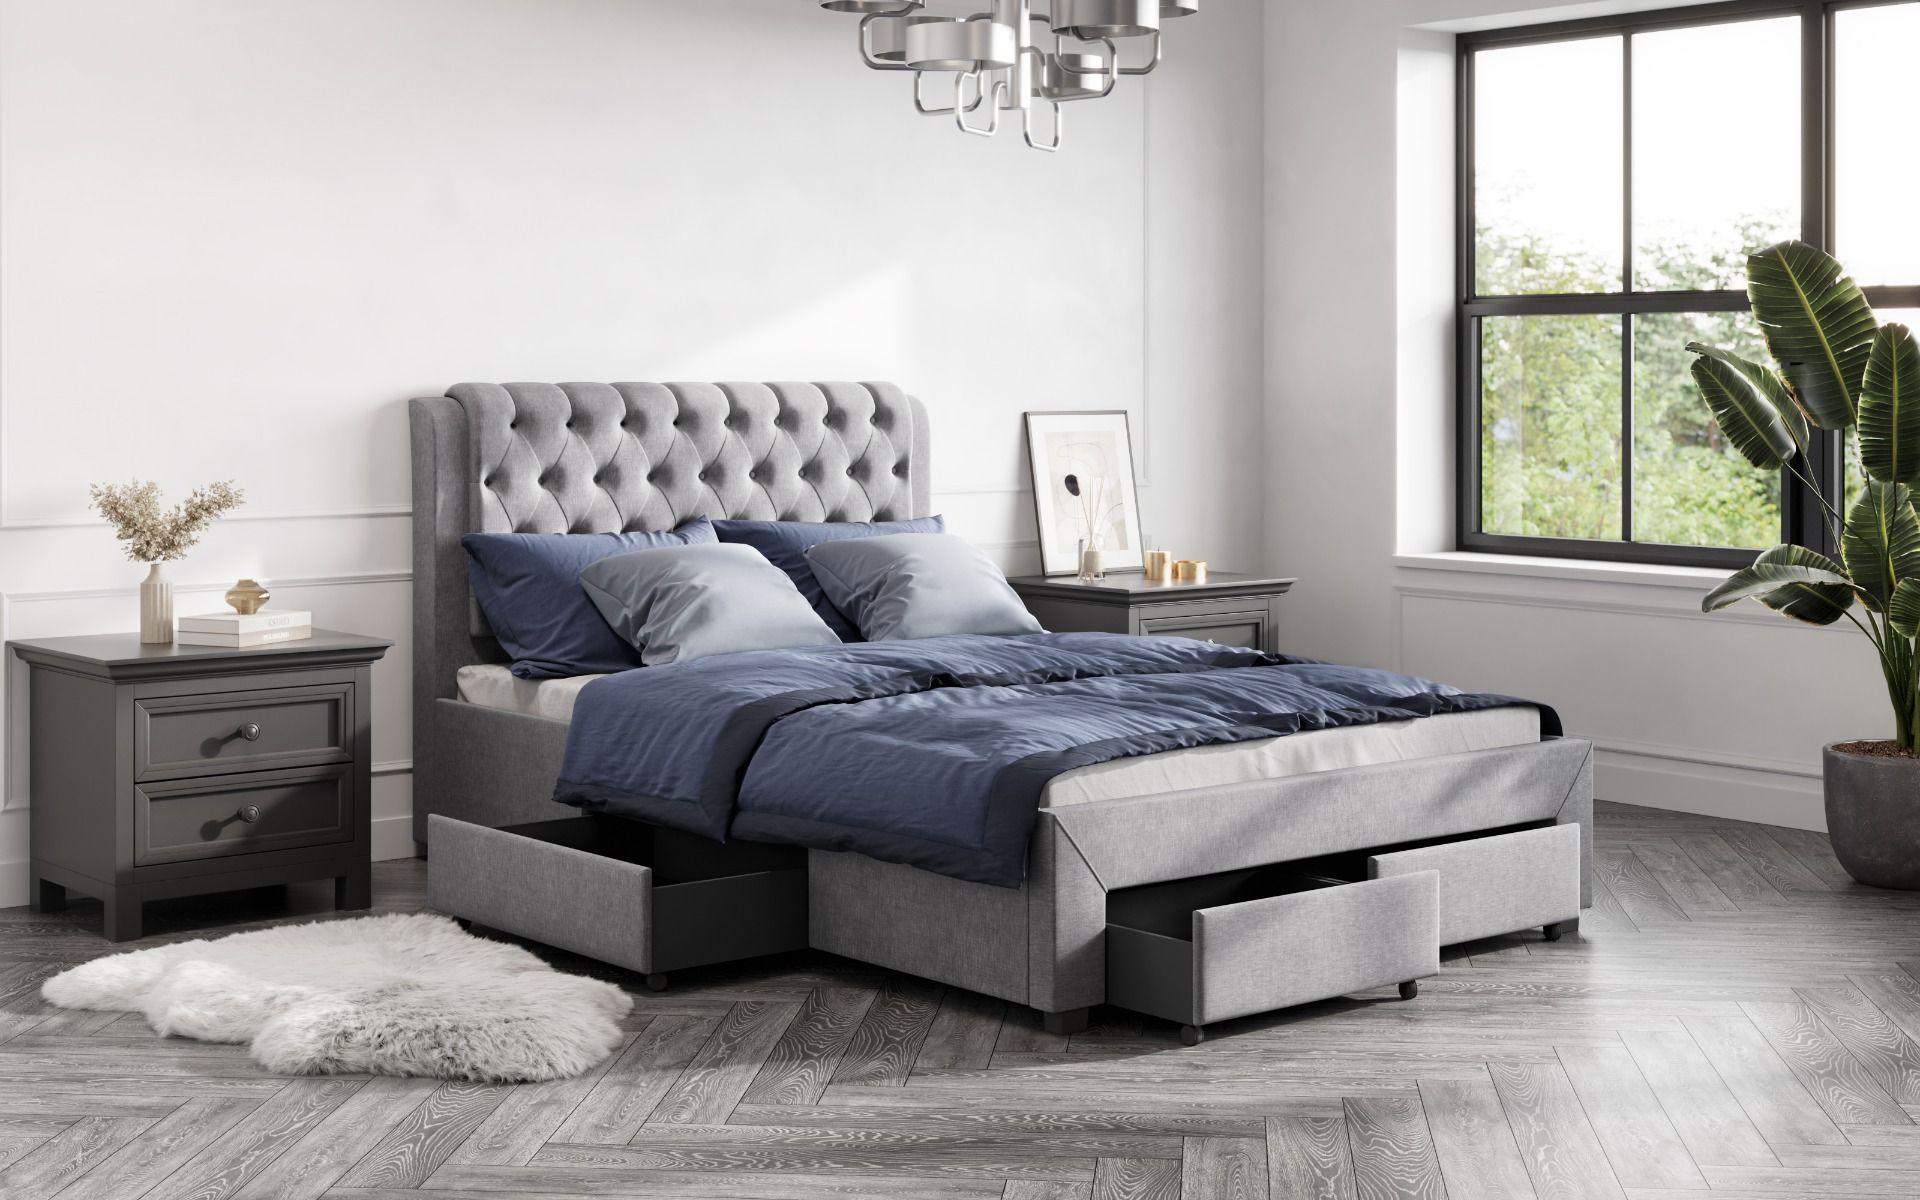 Four Draw Double Bed Frame Light Grey 2